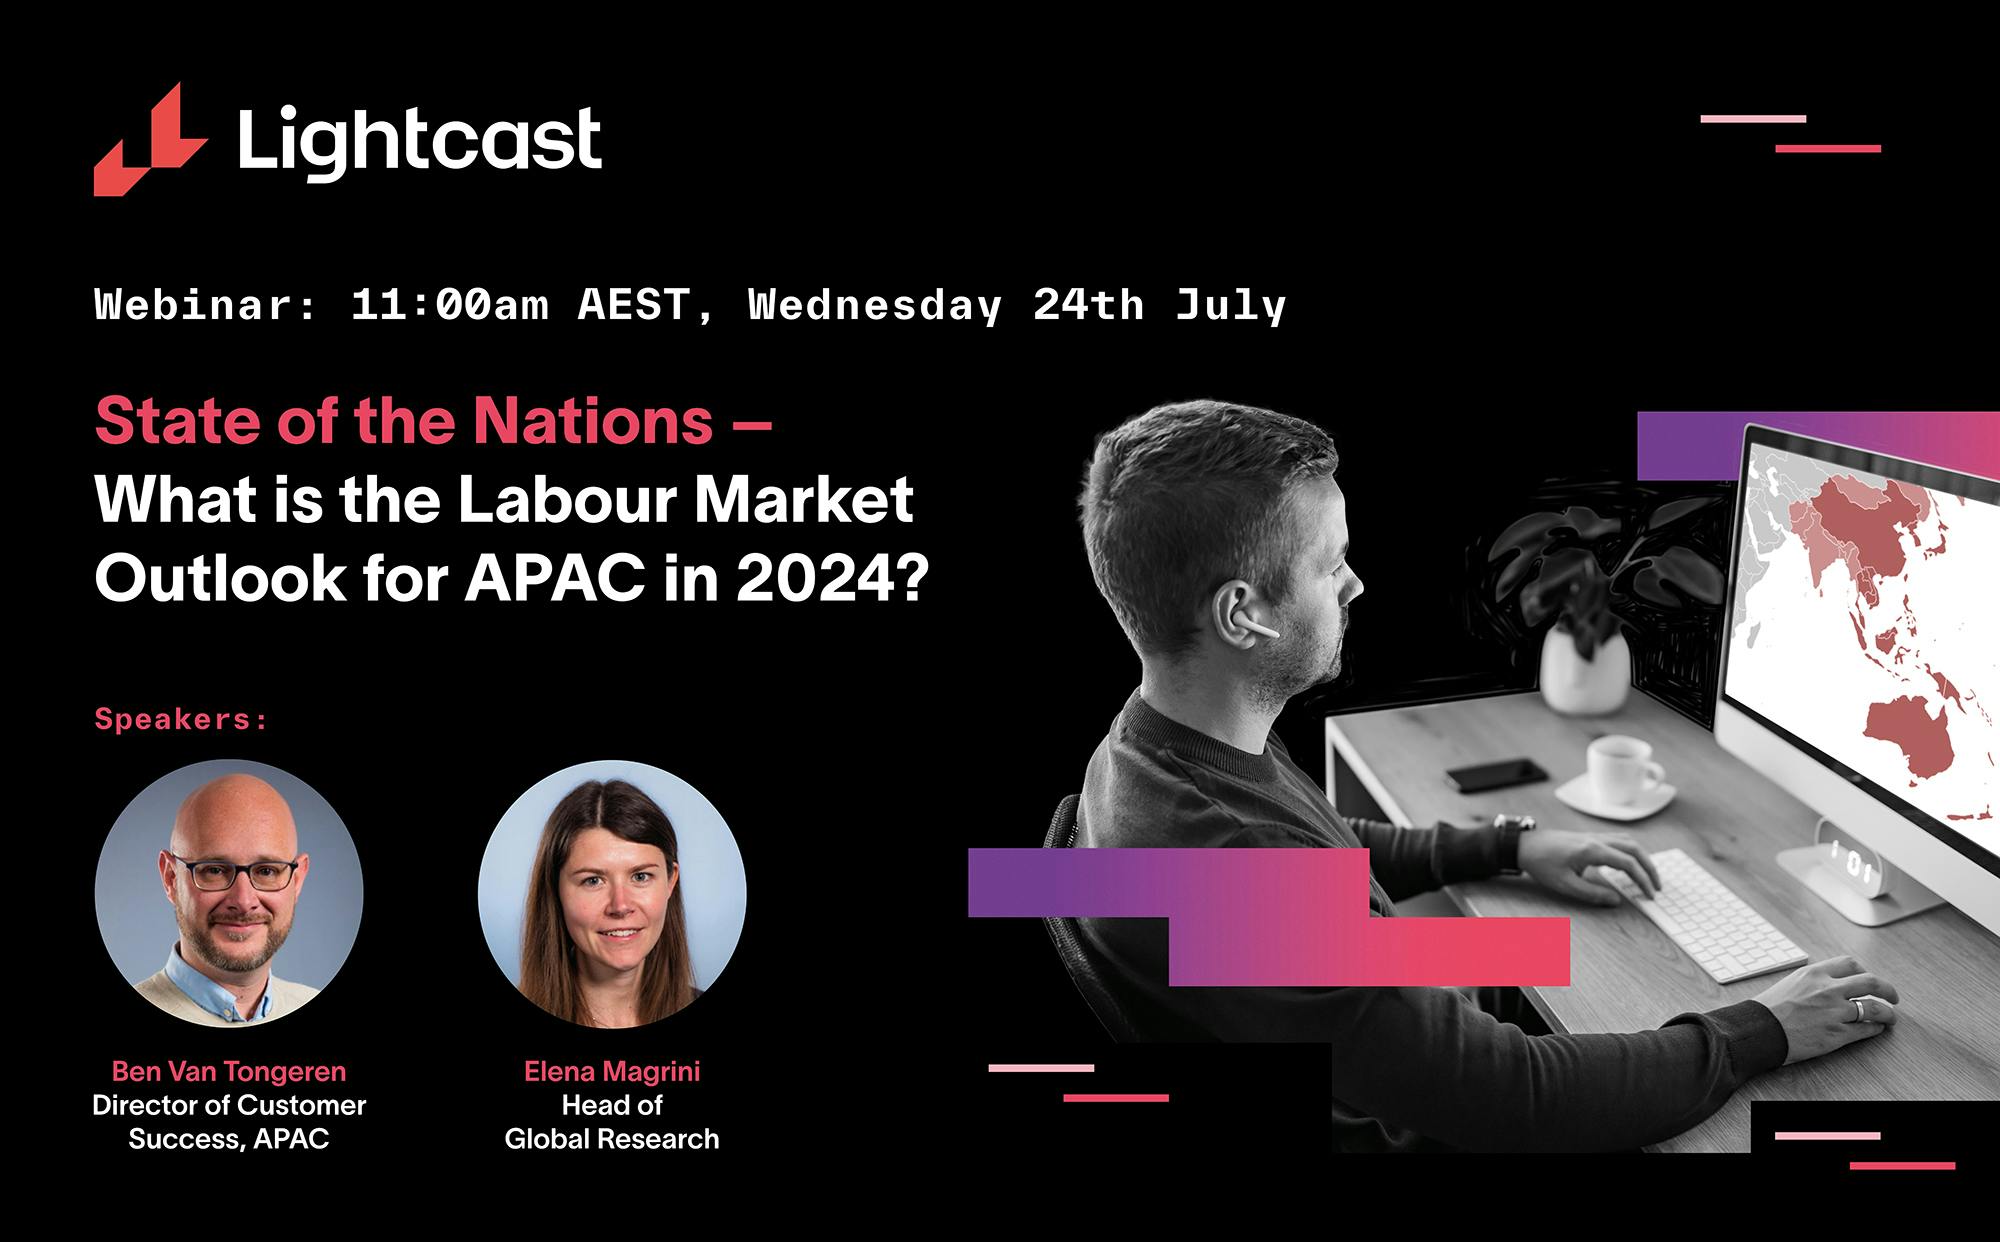 State of the Nations - APAC